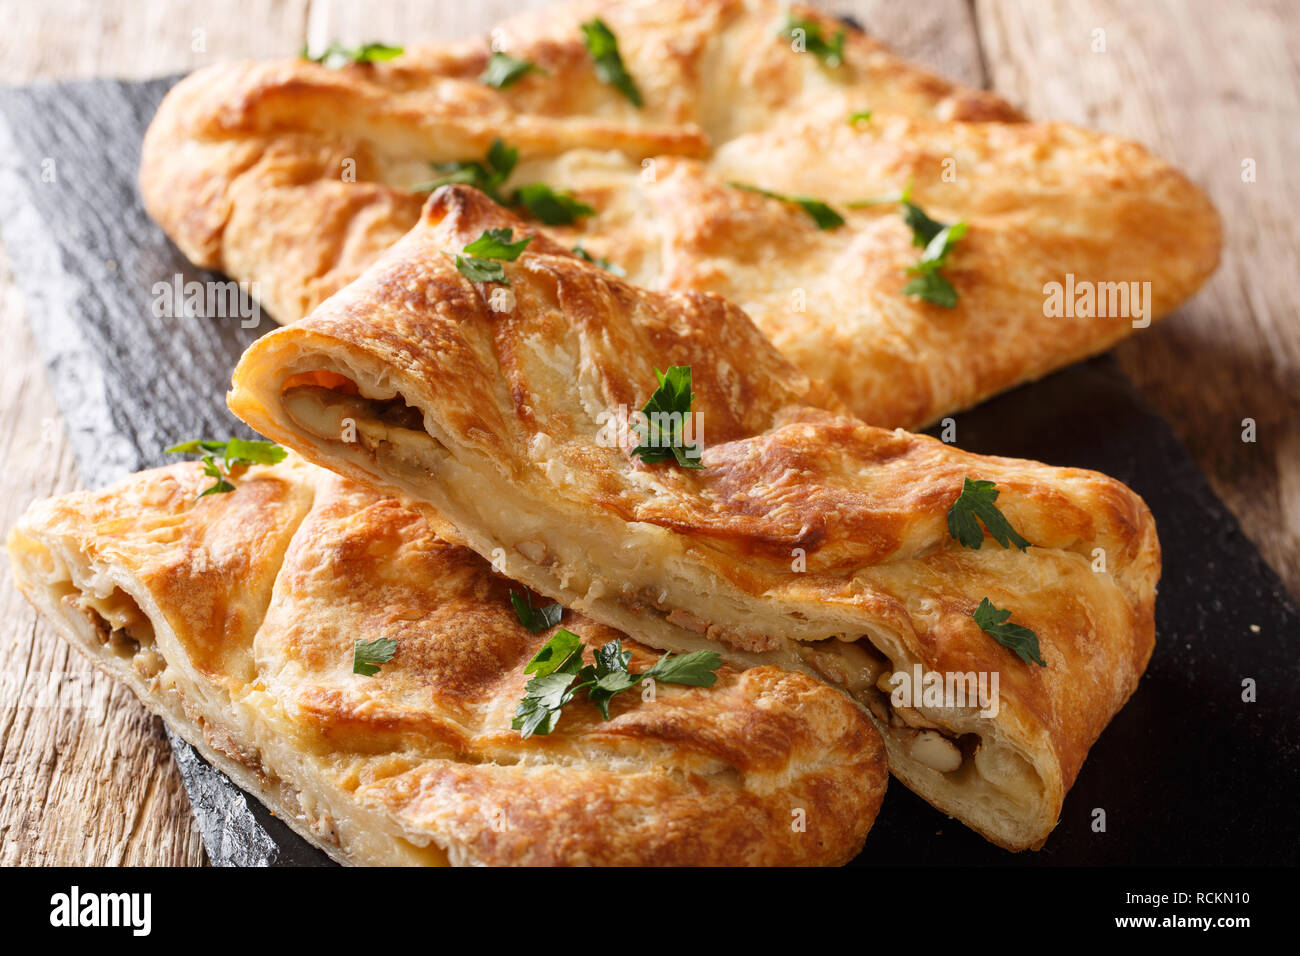 Khachapuri is a traditional Georgian dish of cheese-filled bread. The filling contains cheese sulguni, eggs and other ingredients Stock Photo